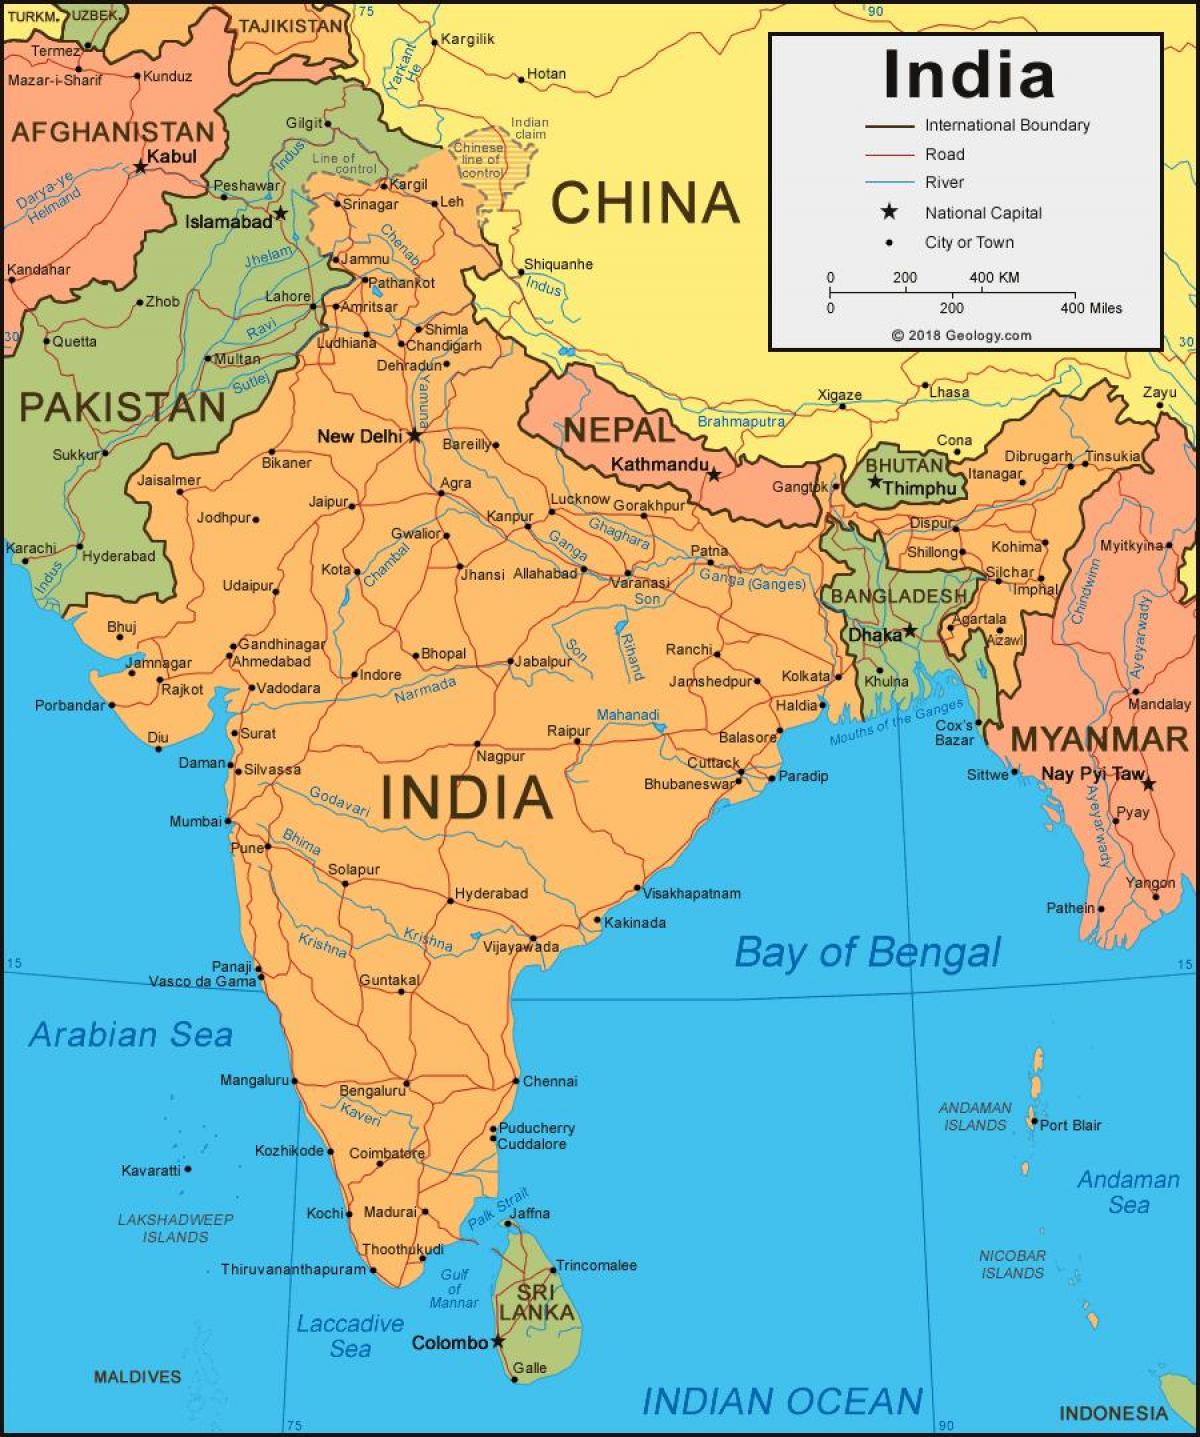 India on a map